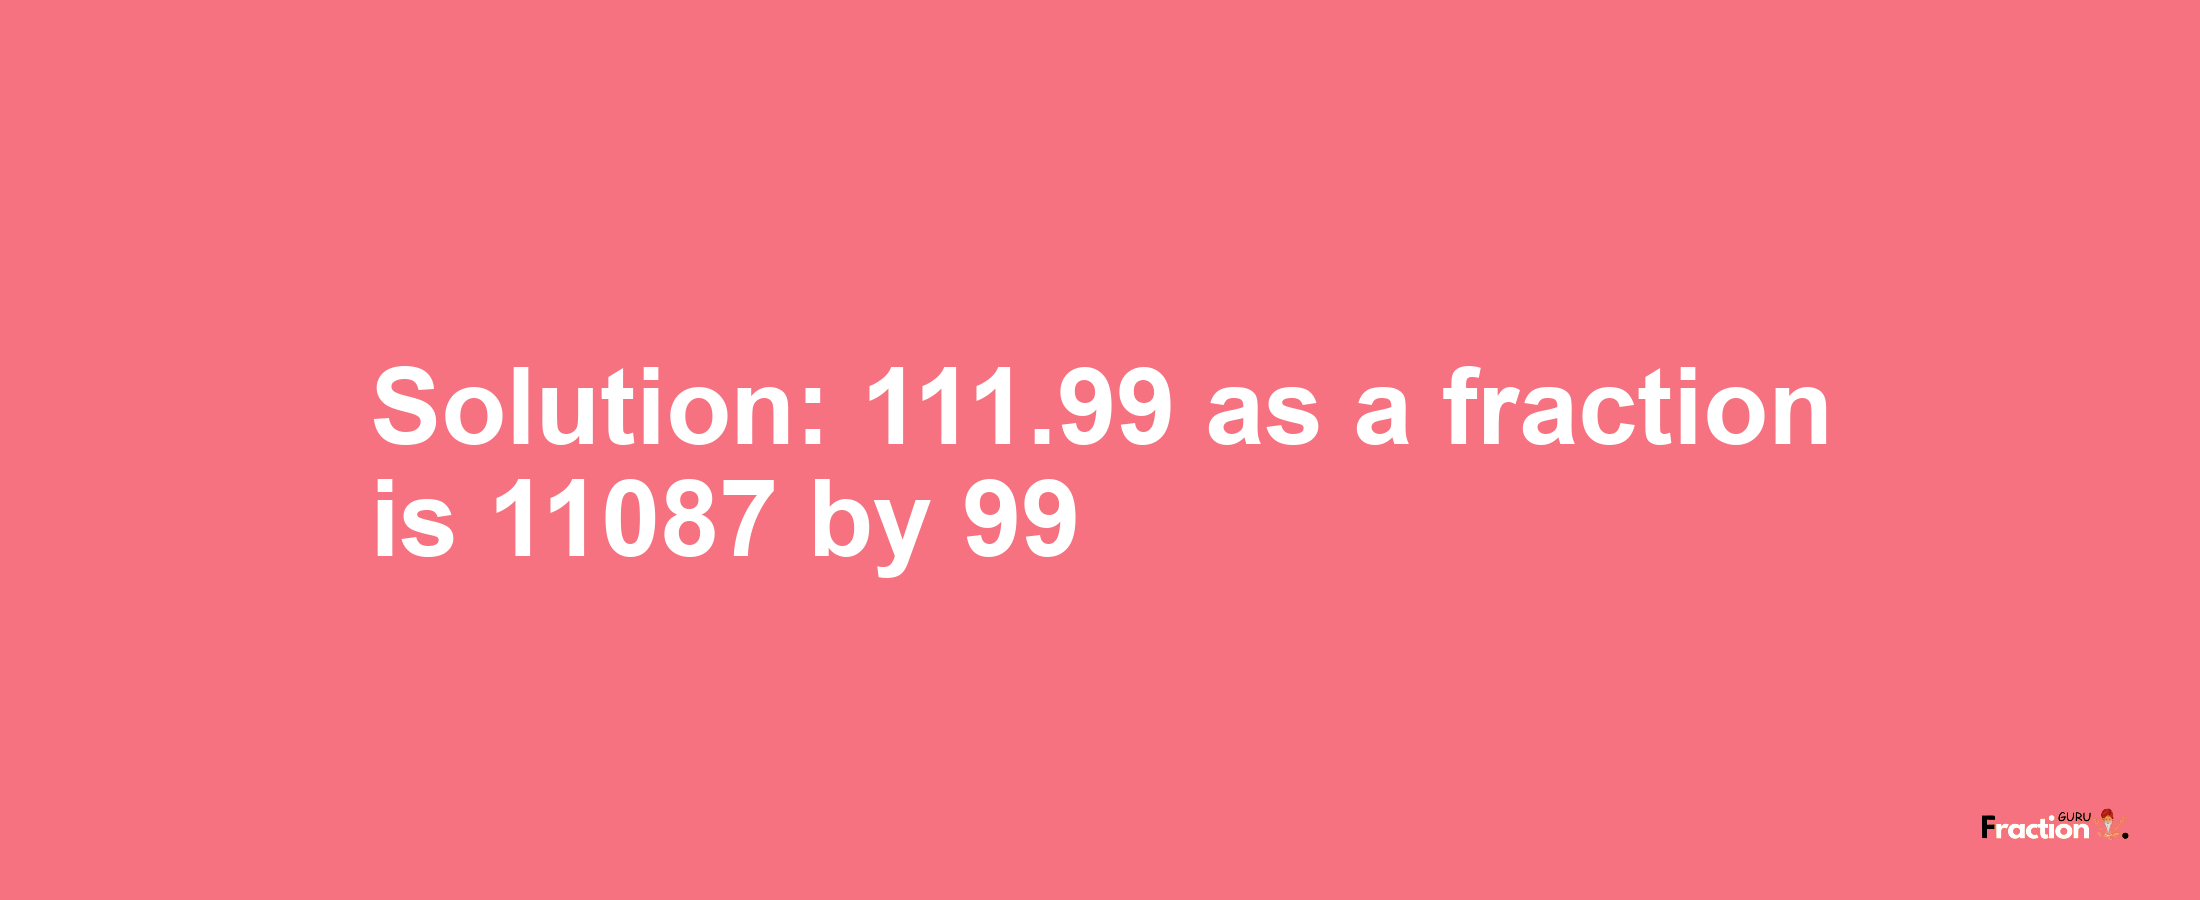 Solution:111.99 as a fraction is 11087/99